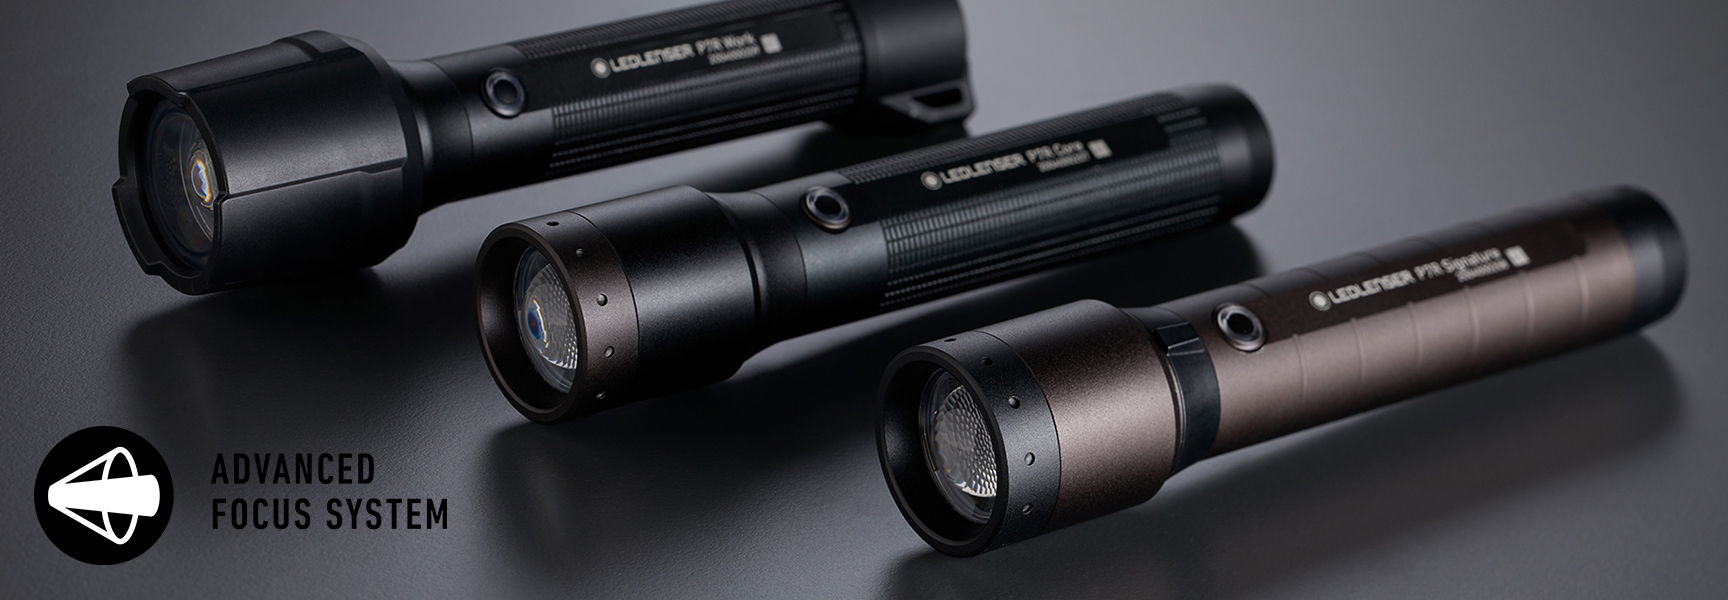 Flashlights with Advanced Focus System